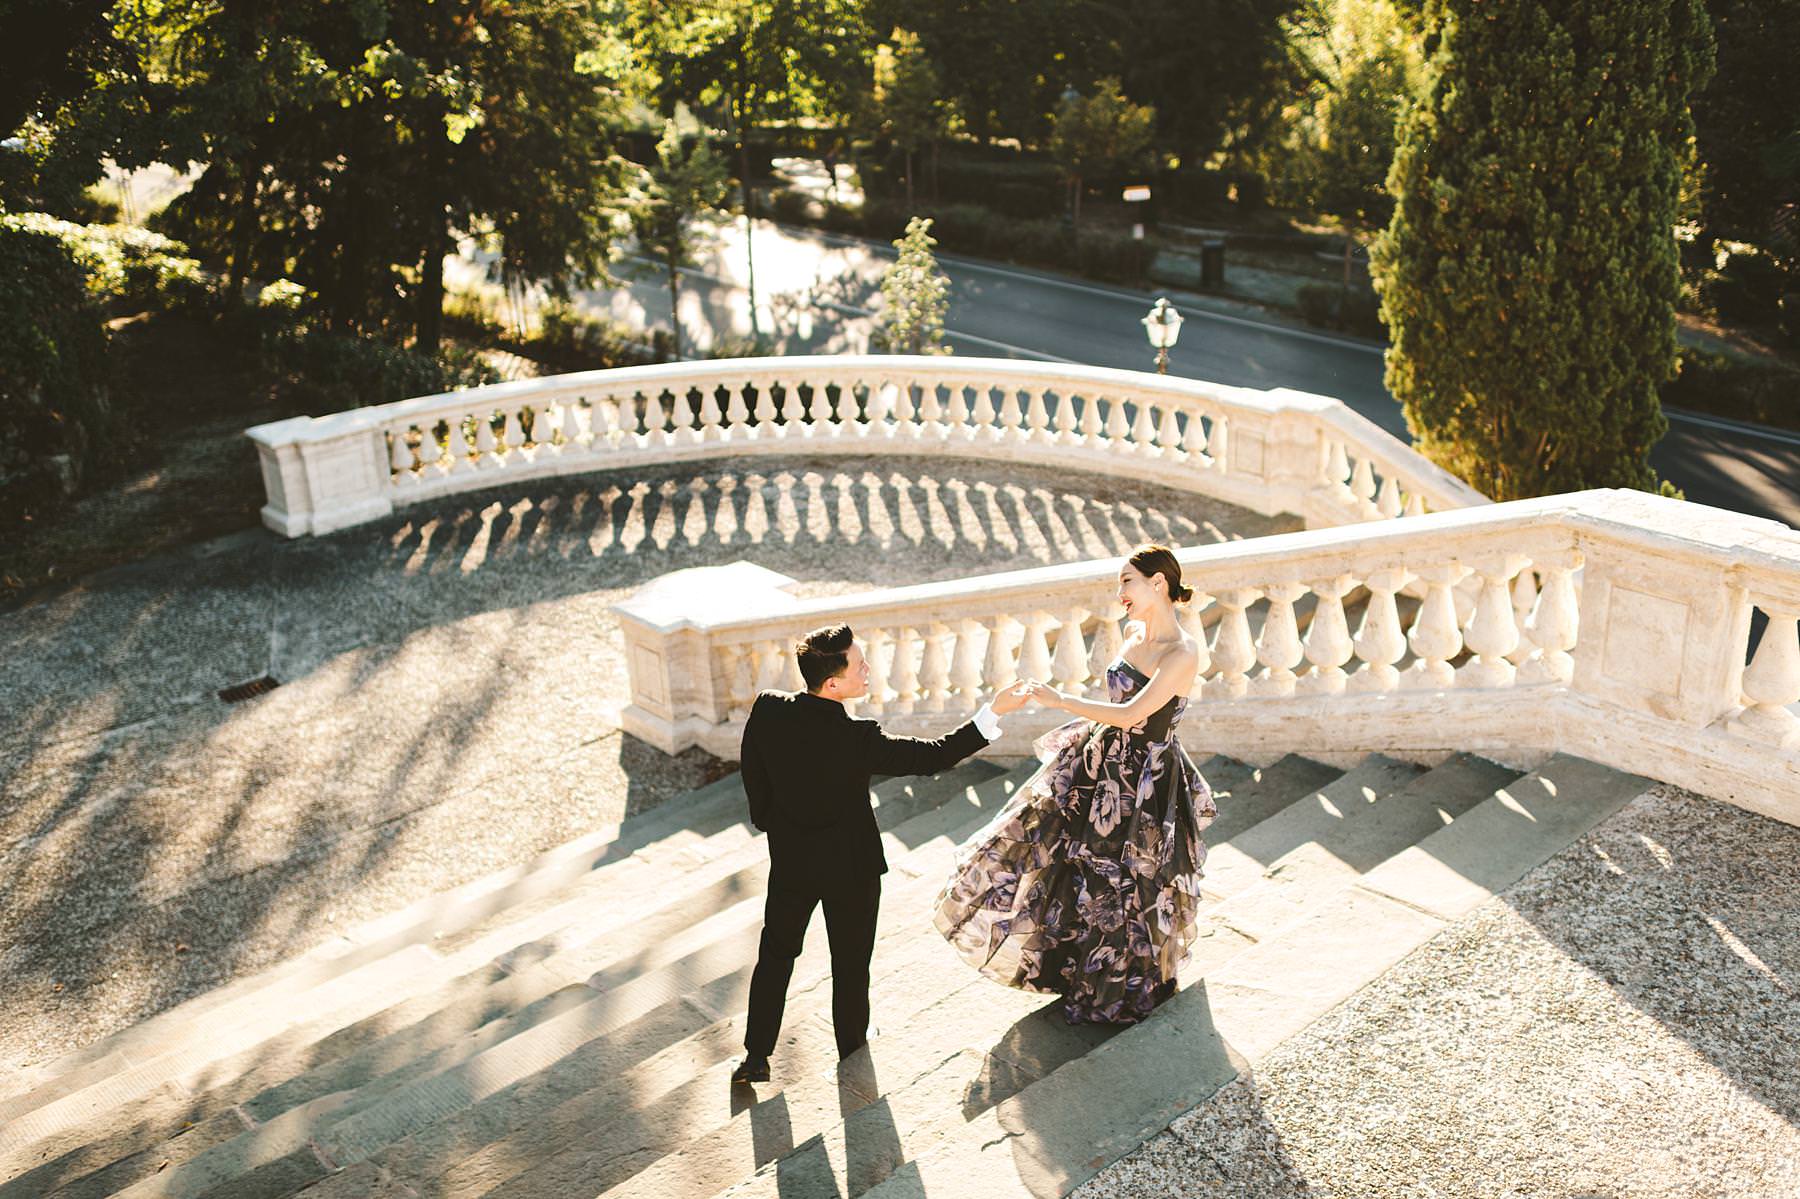 Exquisite pre-wedding photo shoot in Florence near Grand Hotel Villa Cora. Having both engagement and wedding photos taken by the same person is one of the best gifts you can give to yourself. Not only because you will double the number of incredible images of your love to cherish, but also because you get the chance to familiarize yourself with your photographer and get comfortable in front of the camera